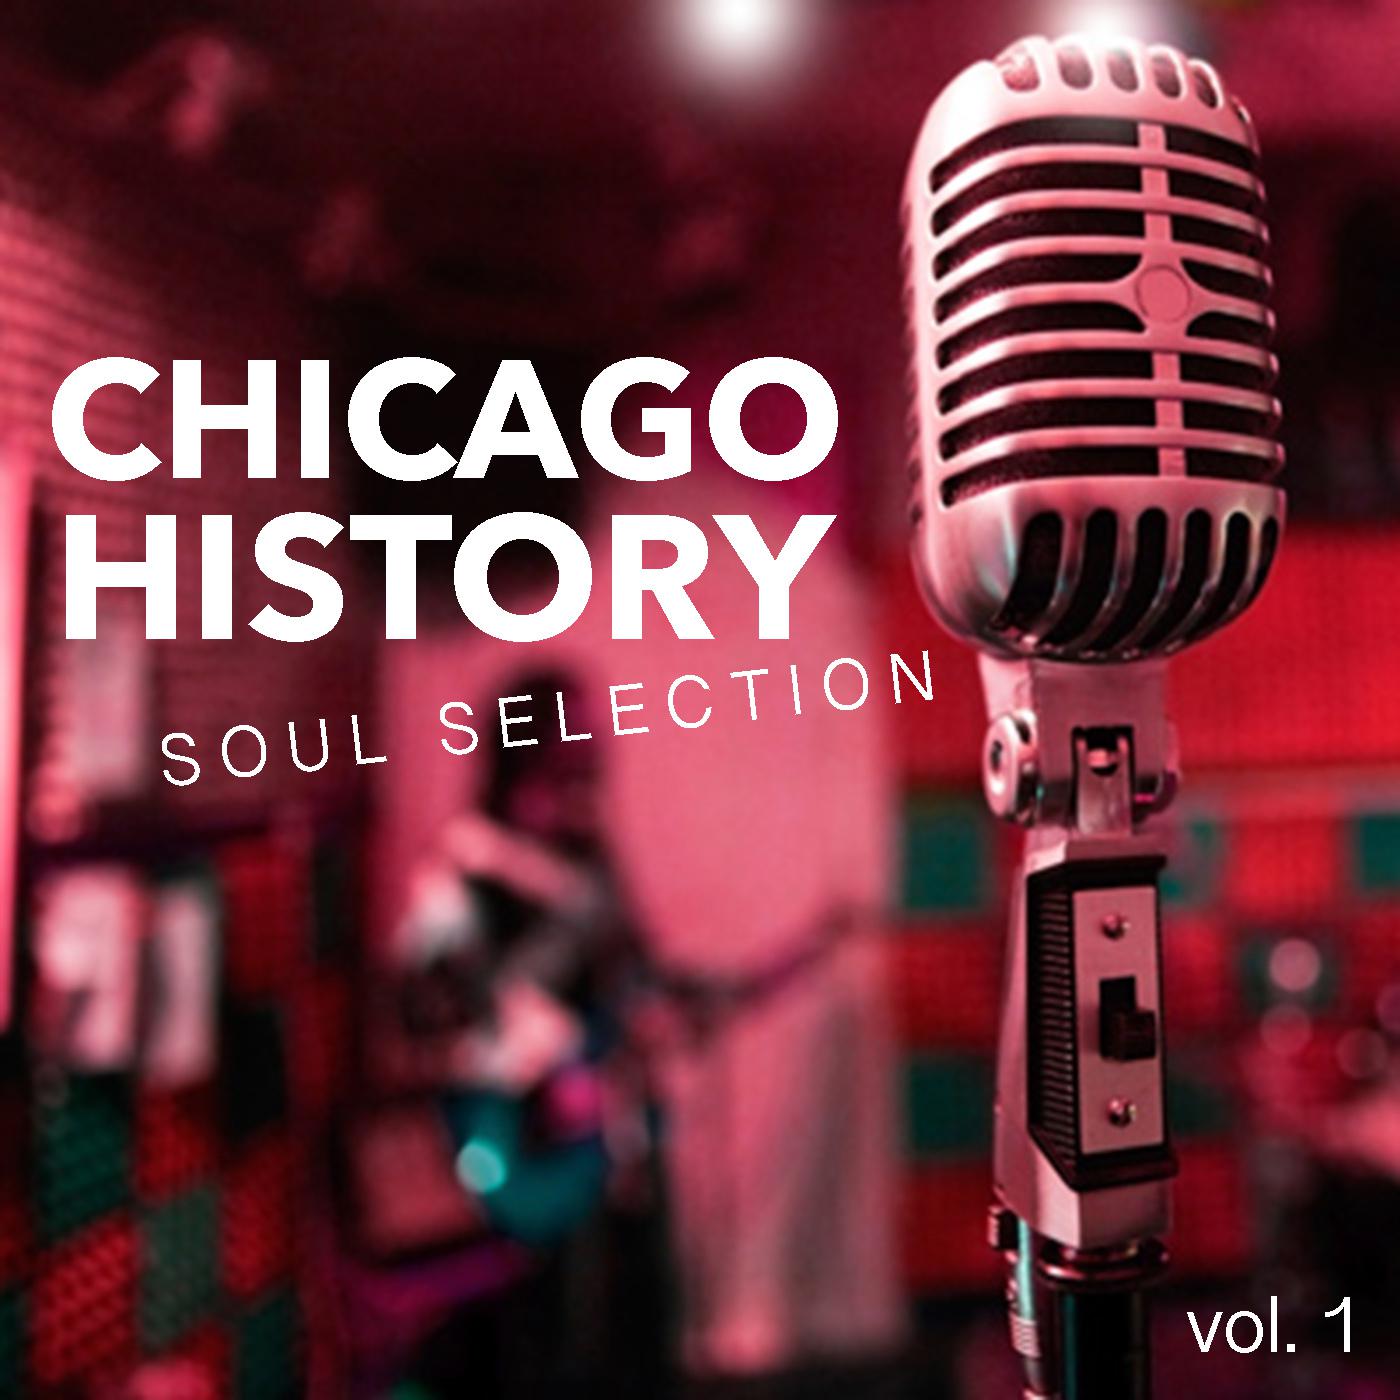 Chicago History Soul Selection vol. 1